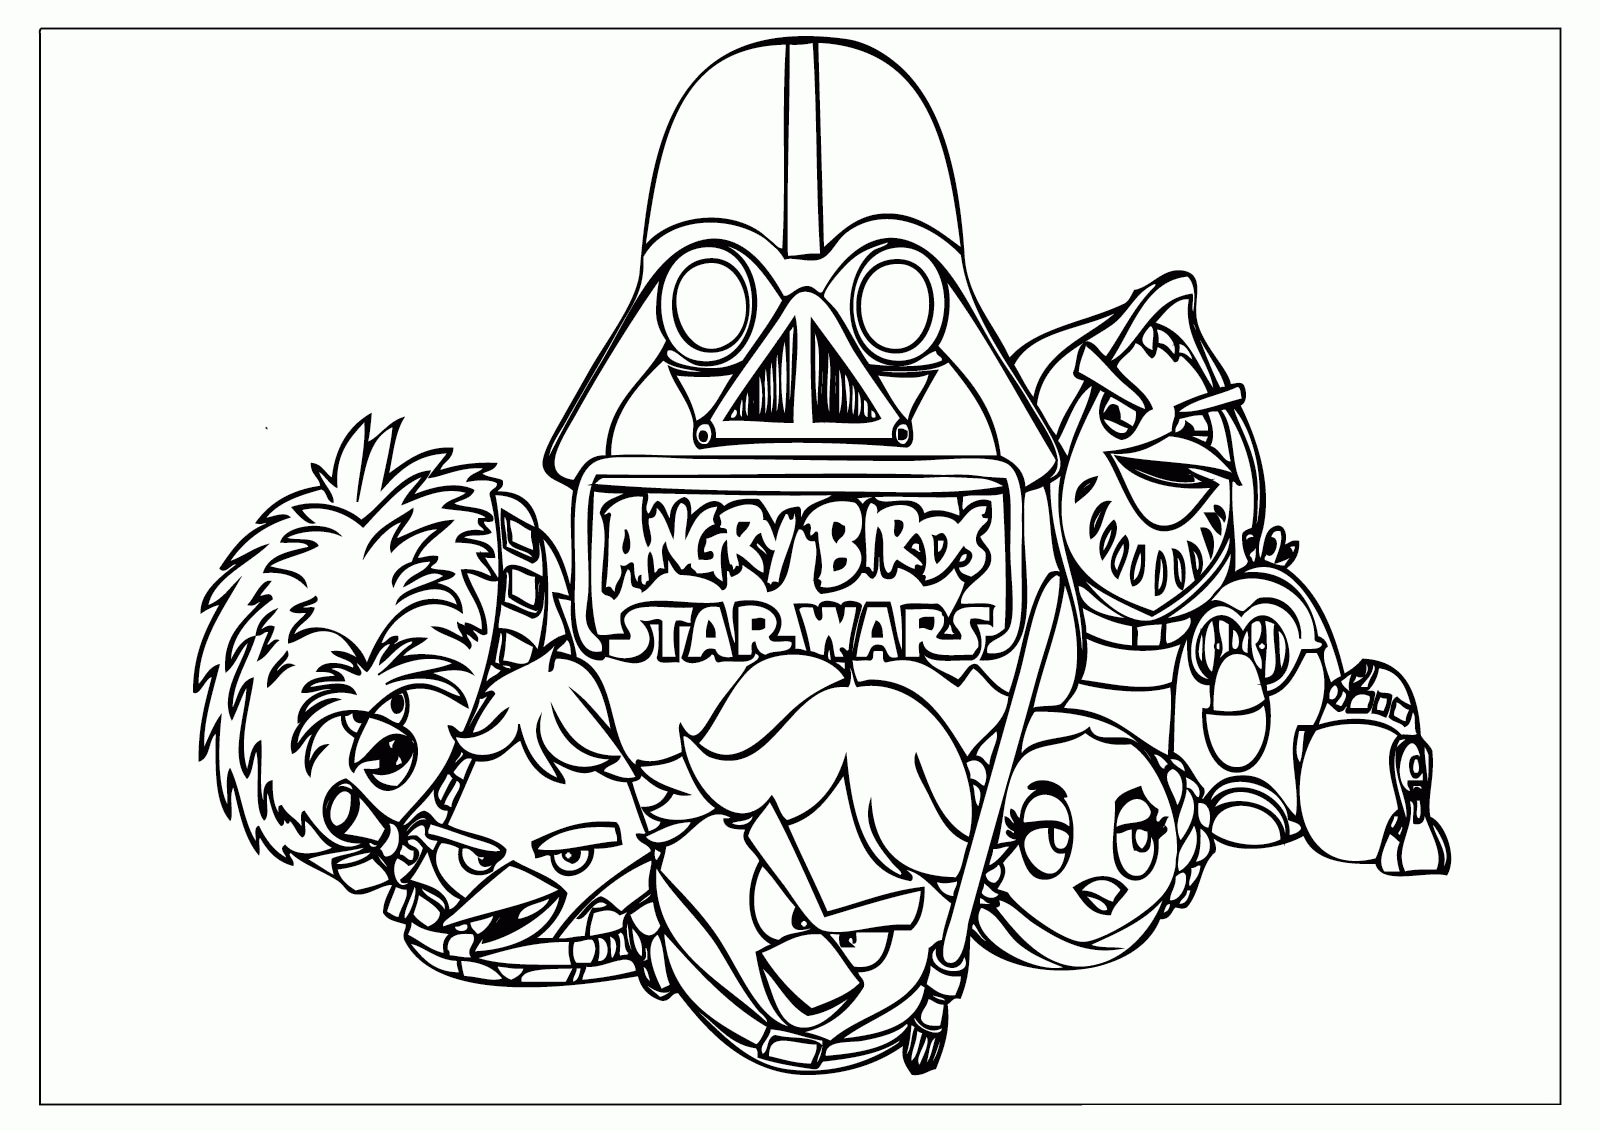 Kids Under 7: Angry Birds coloring pages for kids